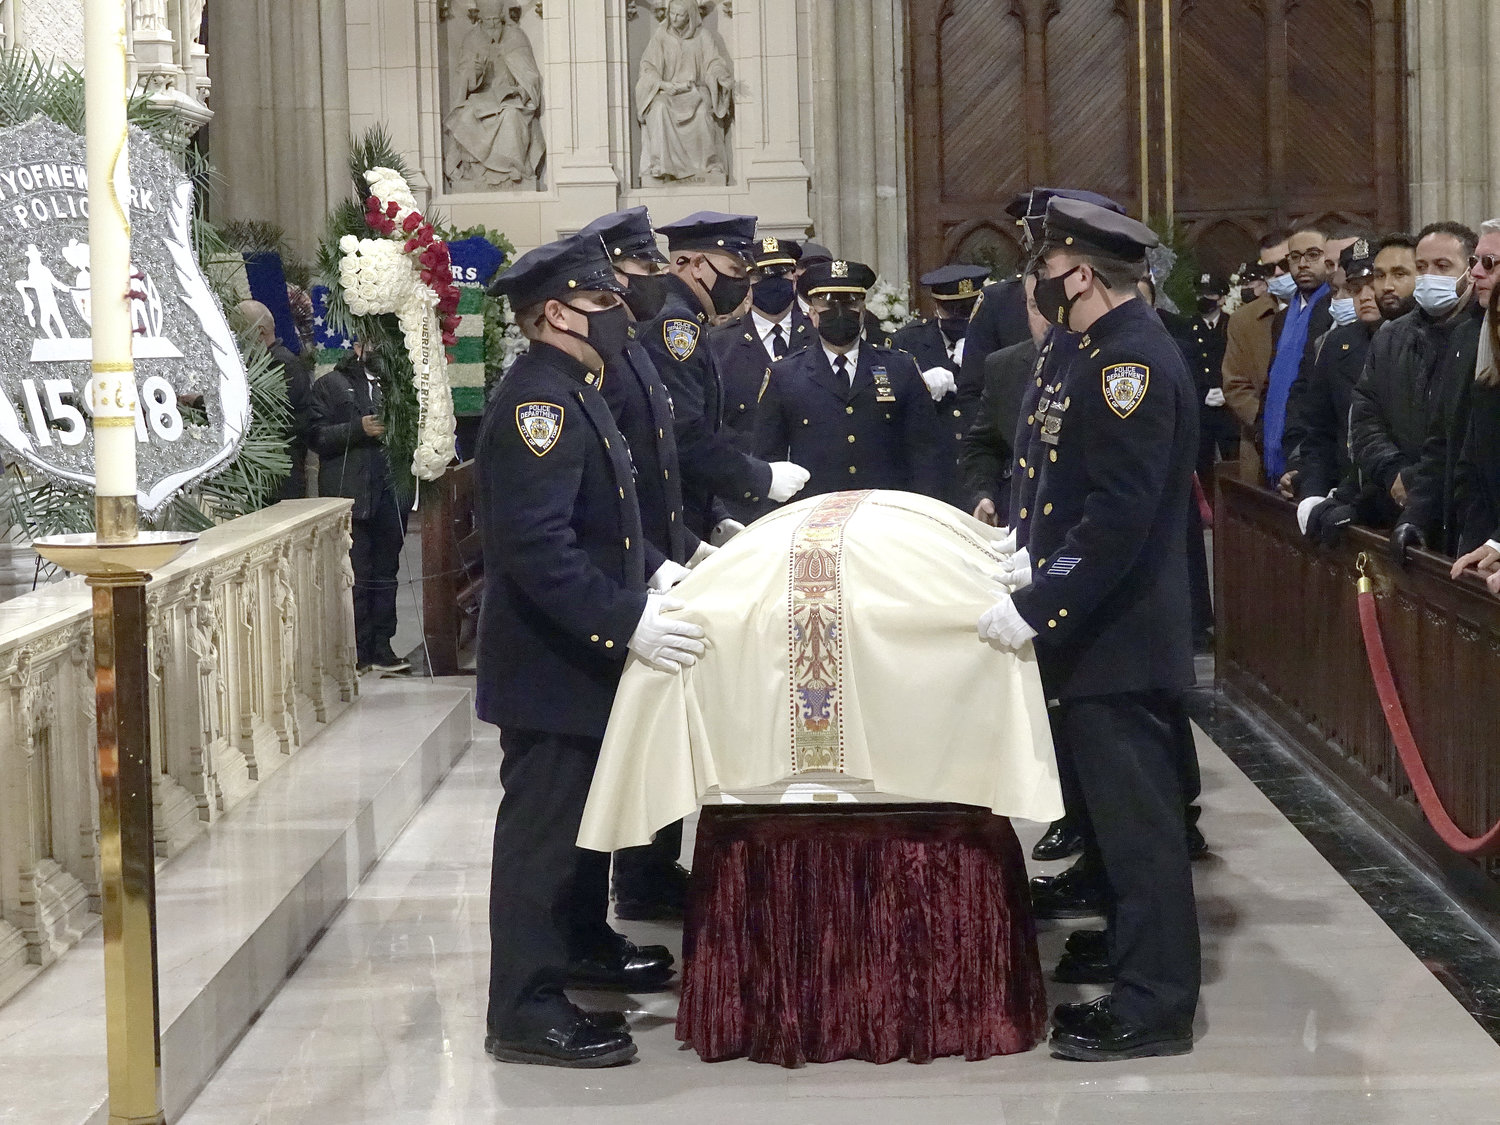 Police officers prepare to carry the casket at the Feb. 2 Funeral Mass for Det. Wilbert Mora in St. Patrick’s Cathedral.